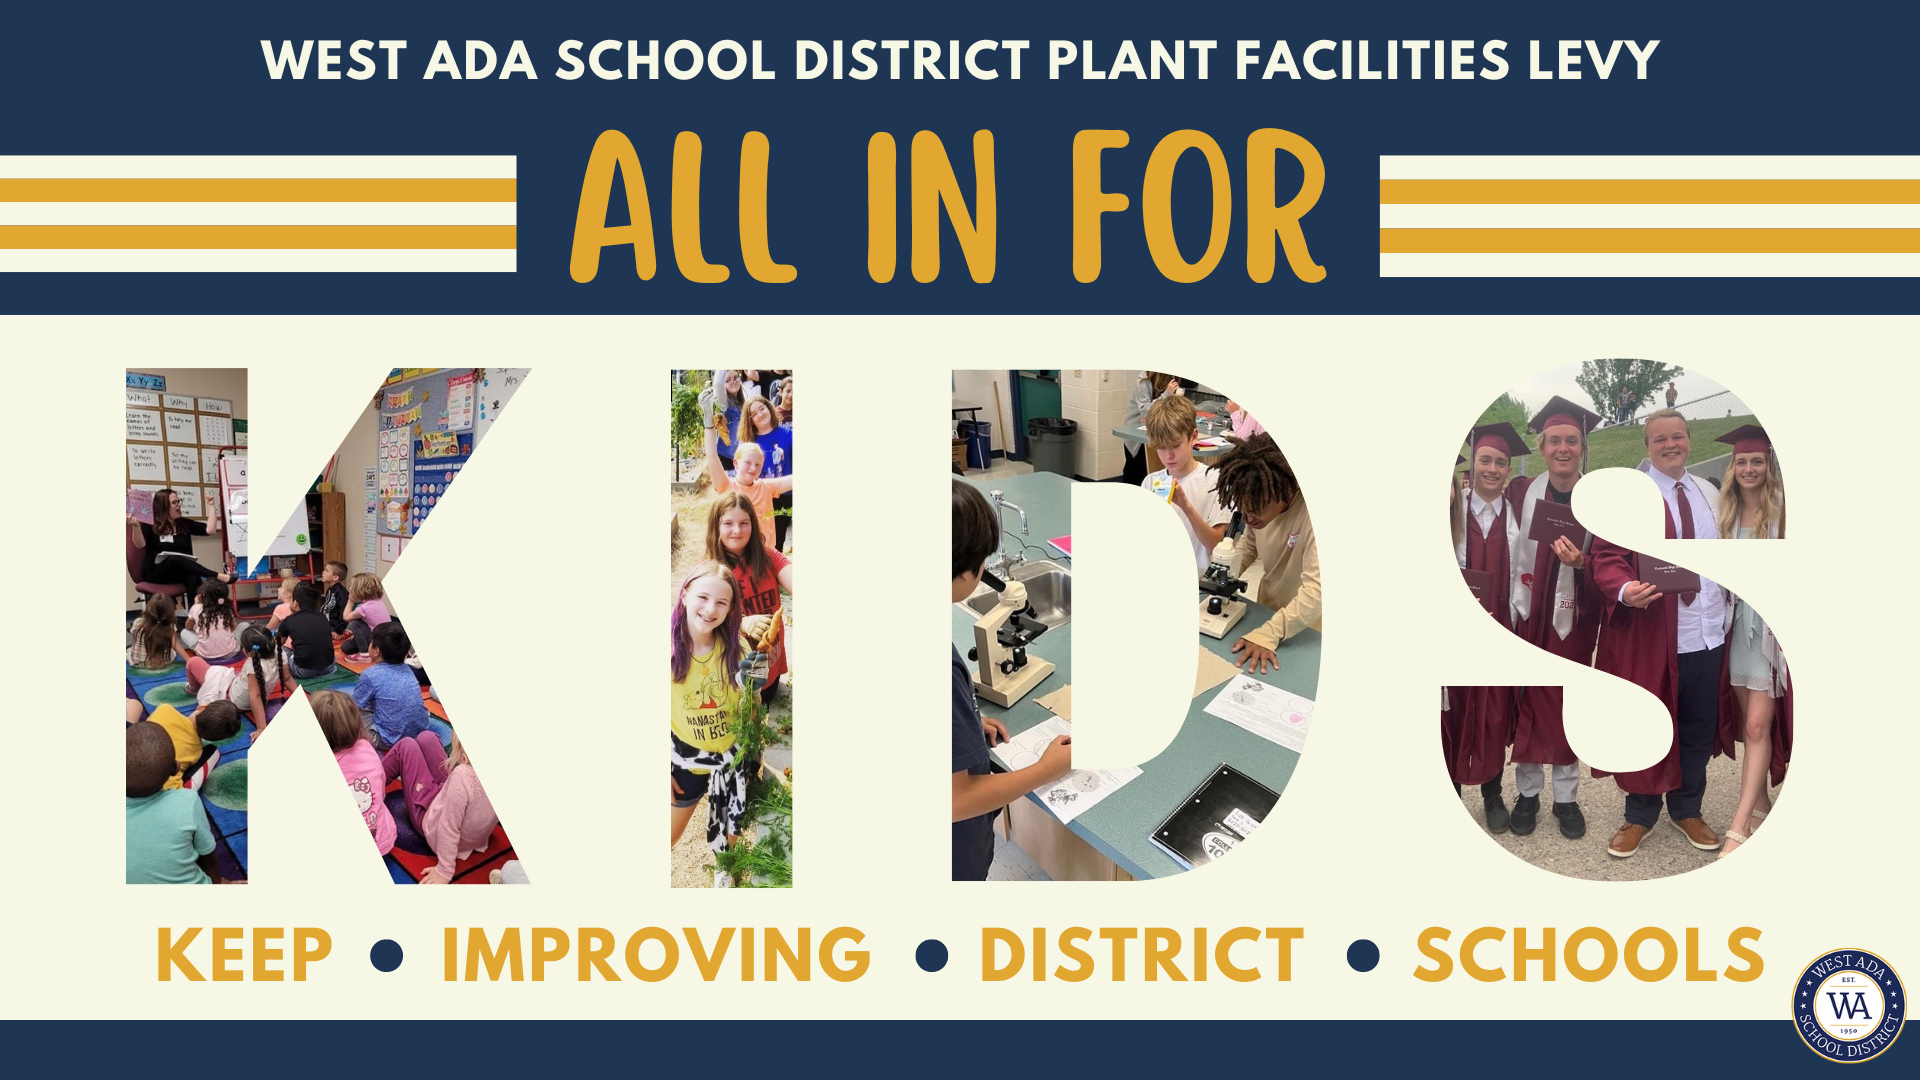 west ada school district plant facilities levy - all in for kids